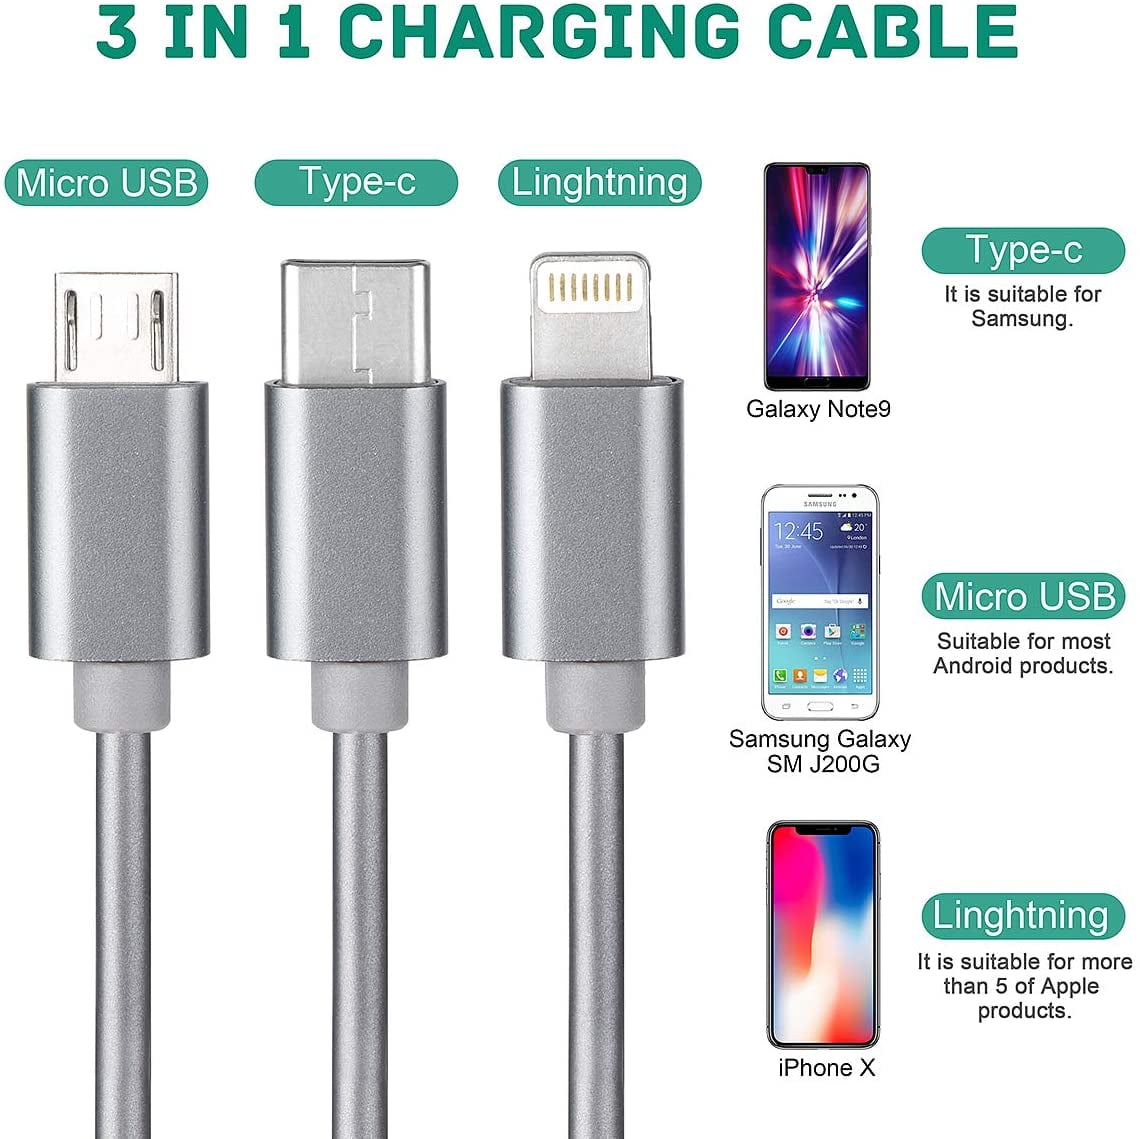 Micro USB Phone Charger Cable Spring Yellow Flower Narcissus with Garden Multi 3 in 1 Retractable Cable Micro USB with Micro USB/Type C Compatible with Cell Phones Tablets and More